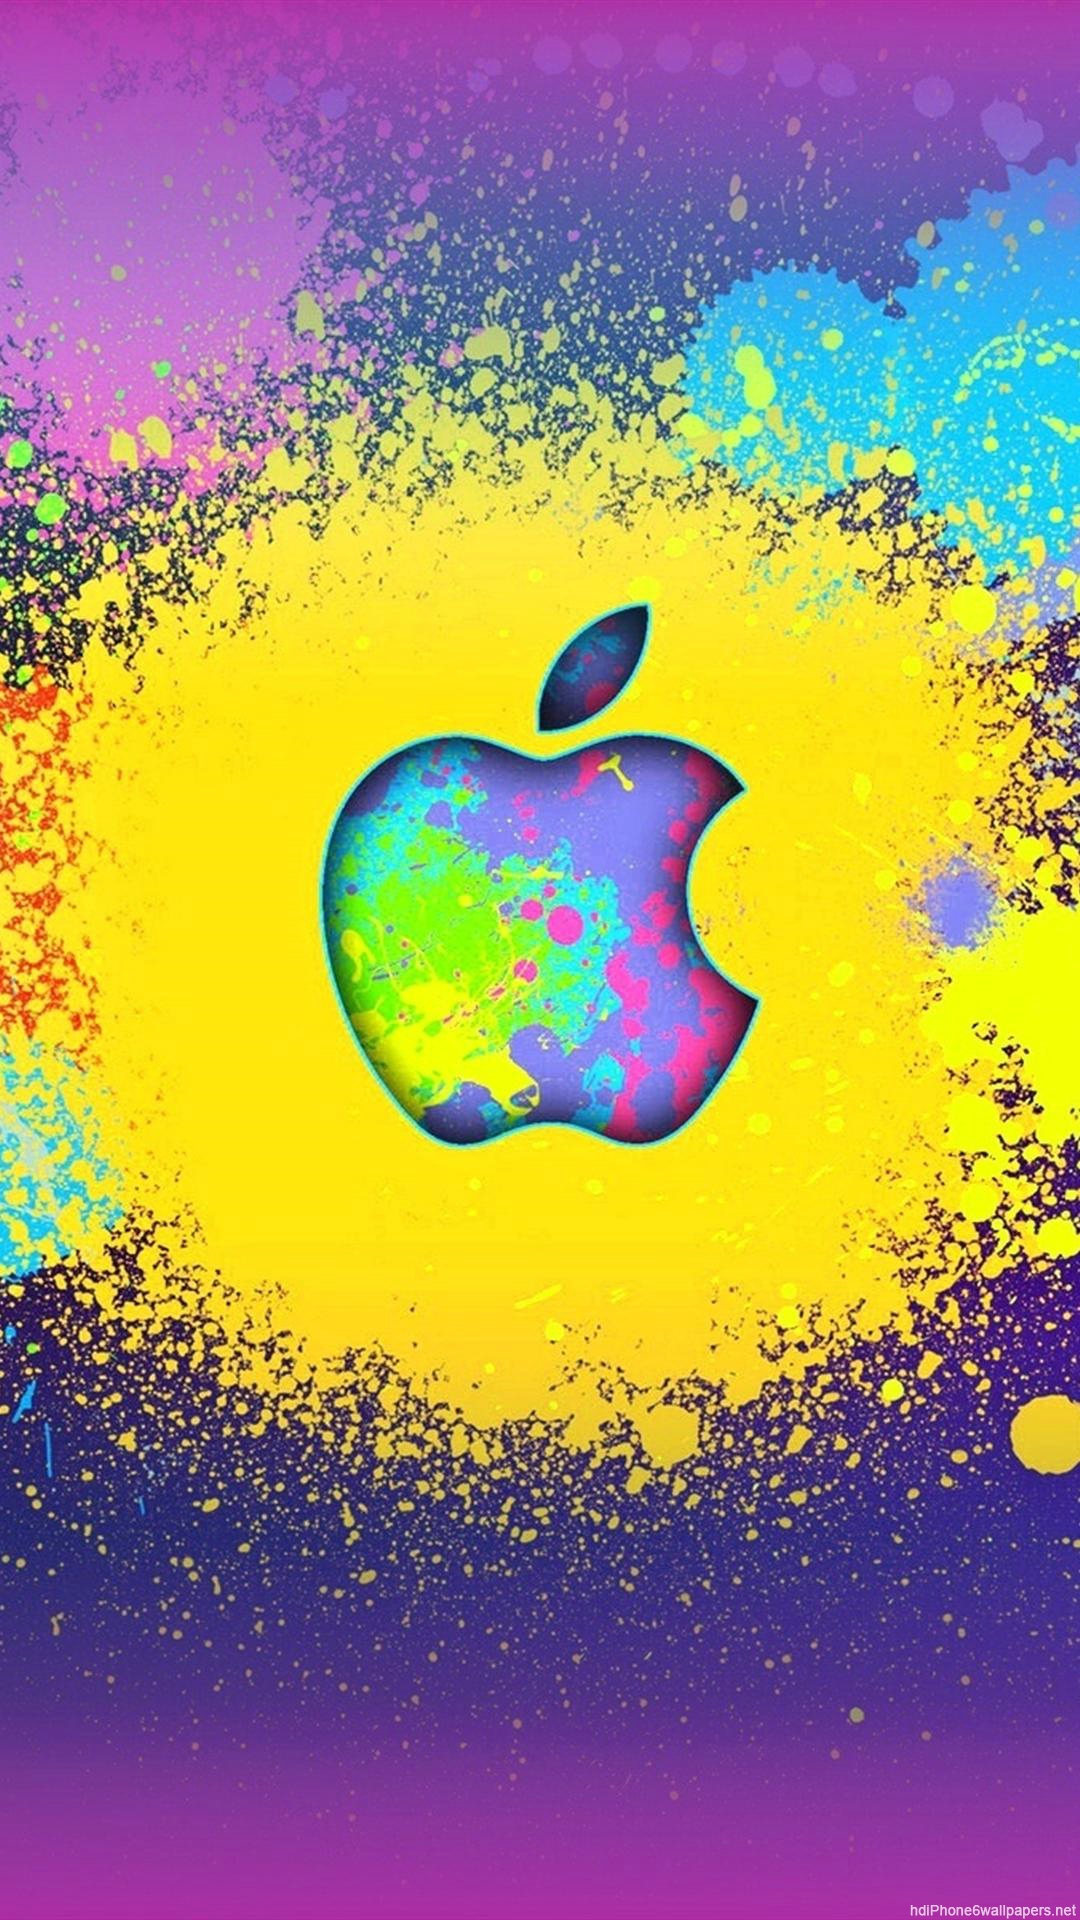 Apple Watch Wallpapers For Iphone Ipad And Desktop